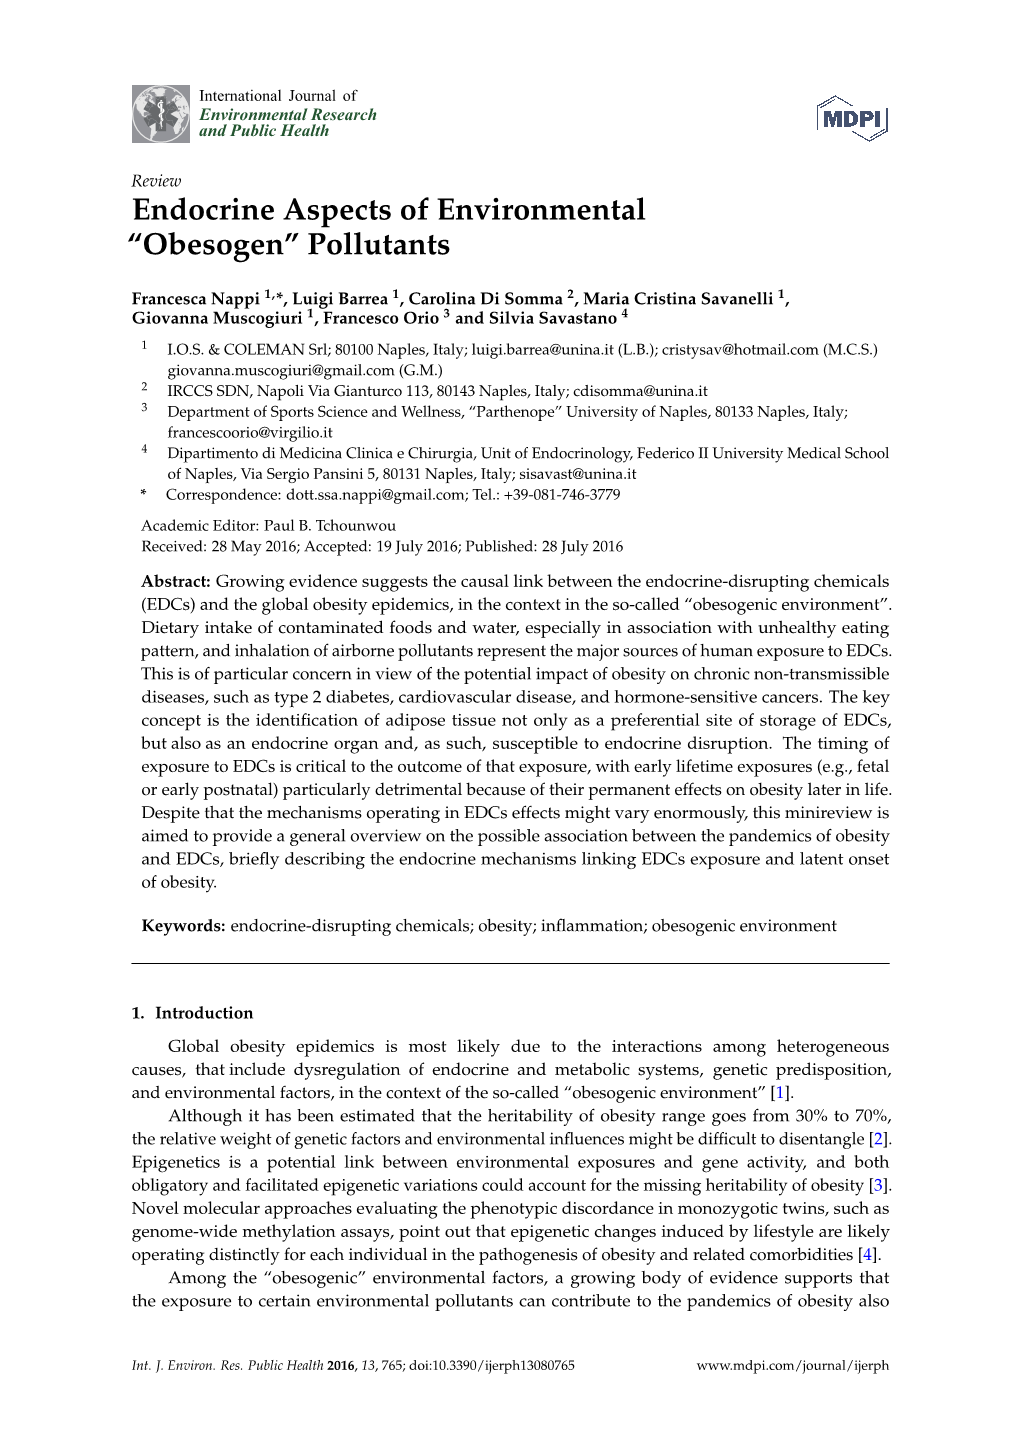 Endocrine Aspects of Environmental “Obesogen” Pollutants